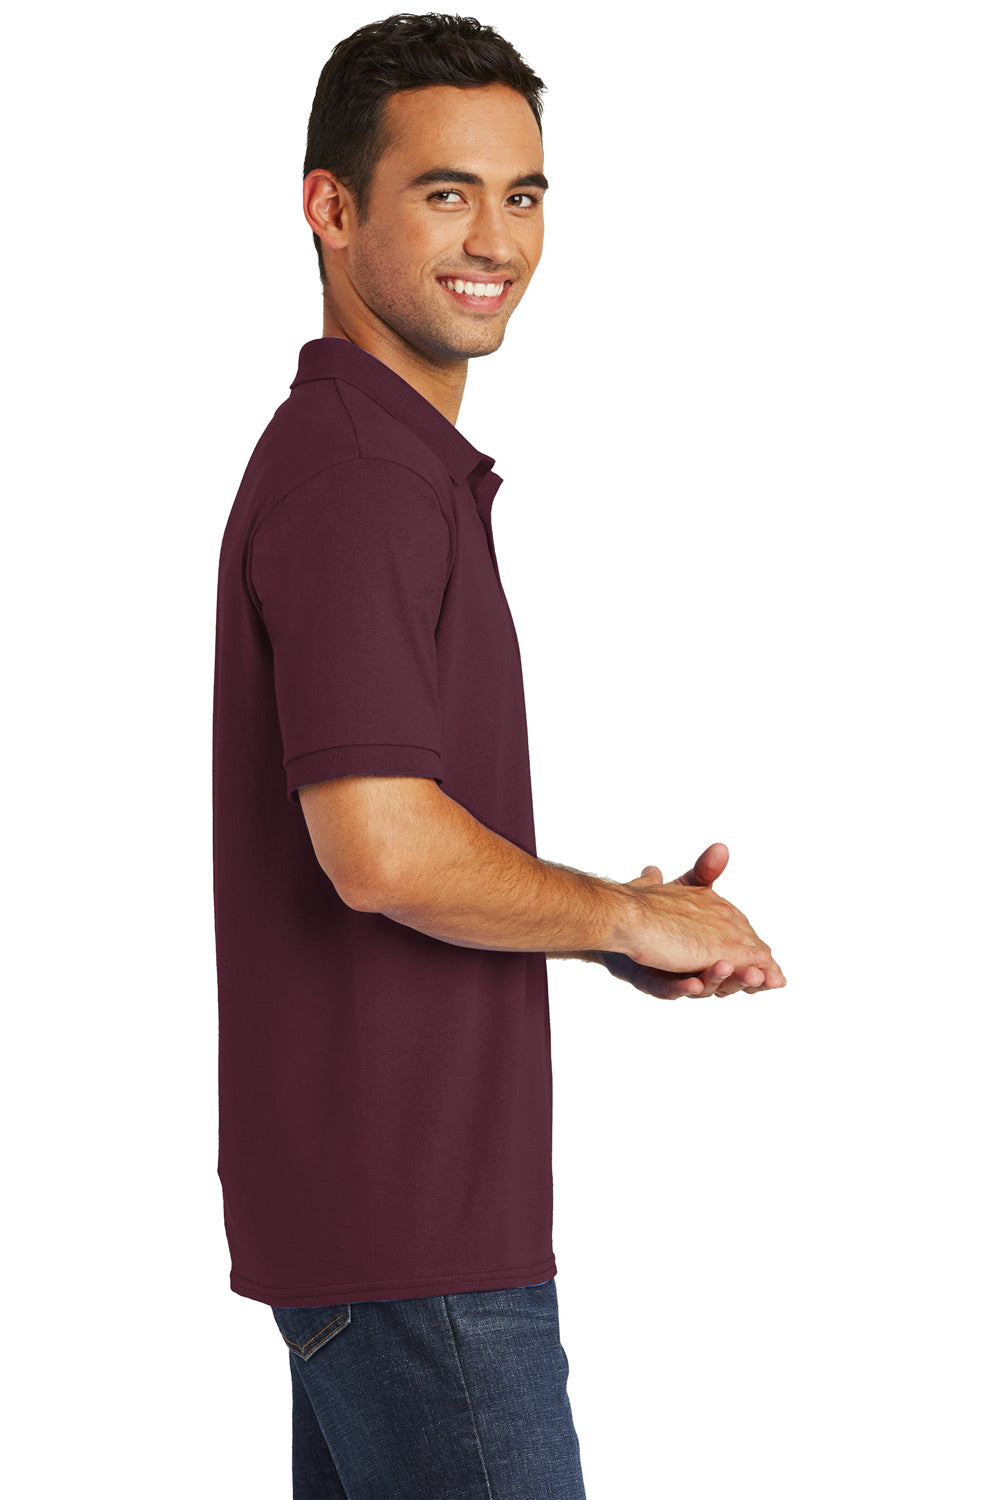 Port & Company KP55 Mens Core Stain Resistant Short Sleeve Polo Shirt Maroon Side